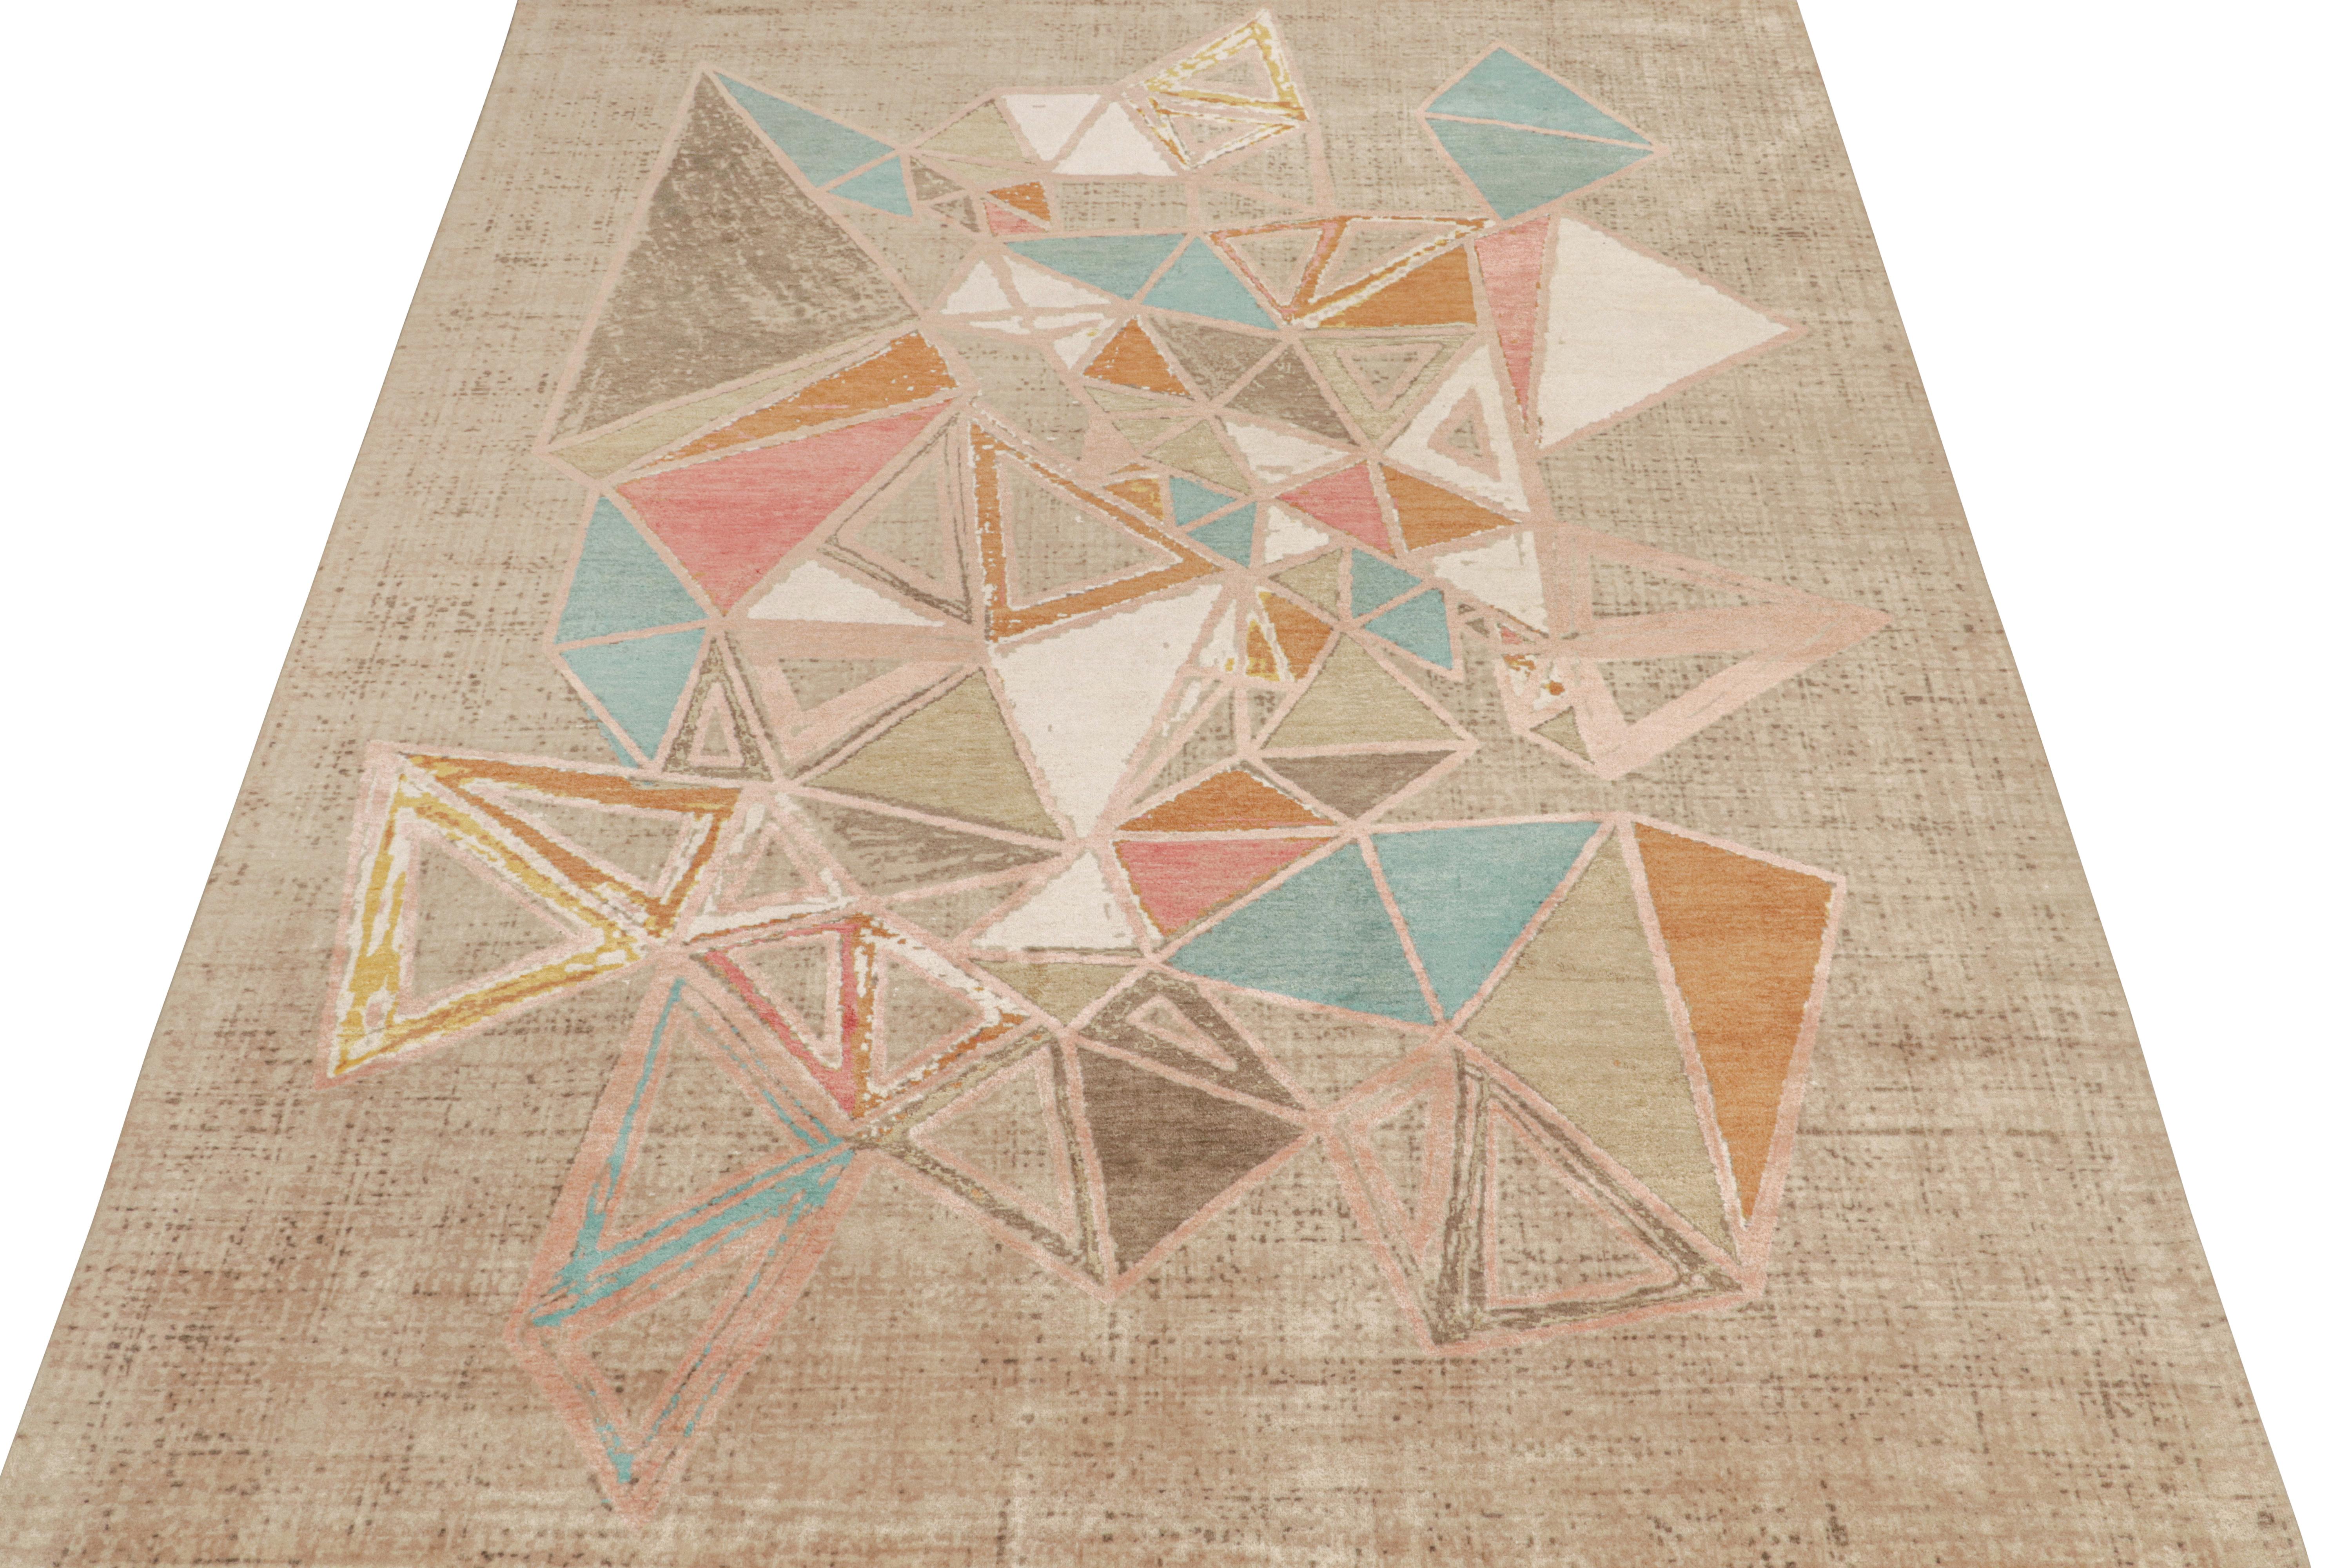 This modern 9x12 rug is an exciting new addition to the Mid-Century Modern rug collection by Rug & Kilim. Hand-knotted in wool, cotton and silk, it’s a bold take on 1950s postmodern aesthetics never-before seen in this quality. 

This design draws